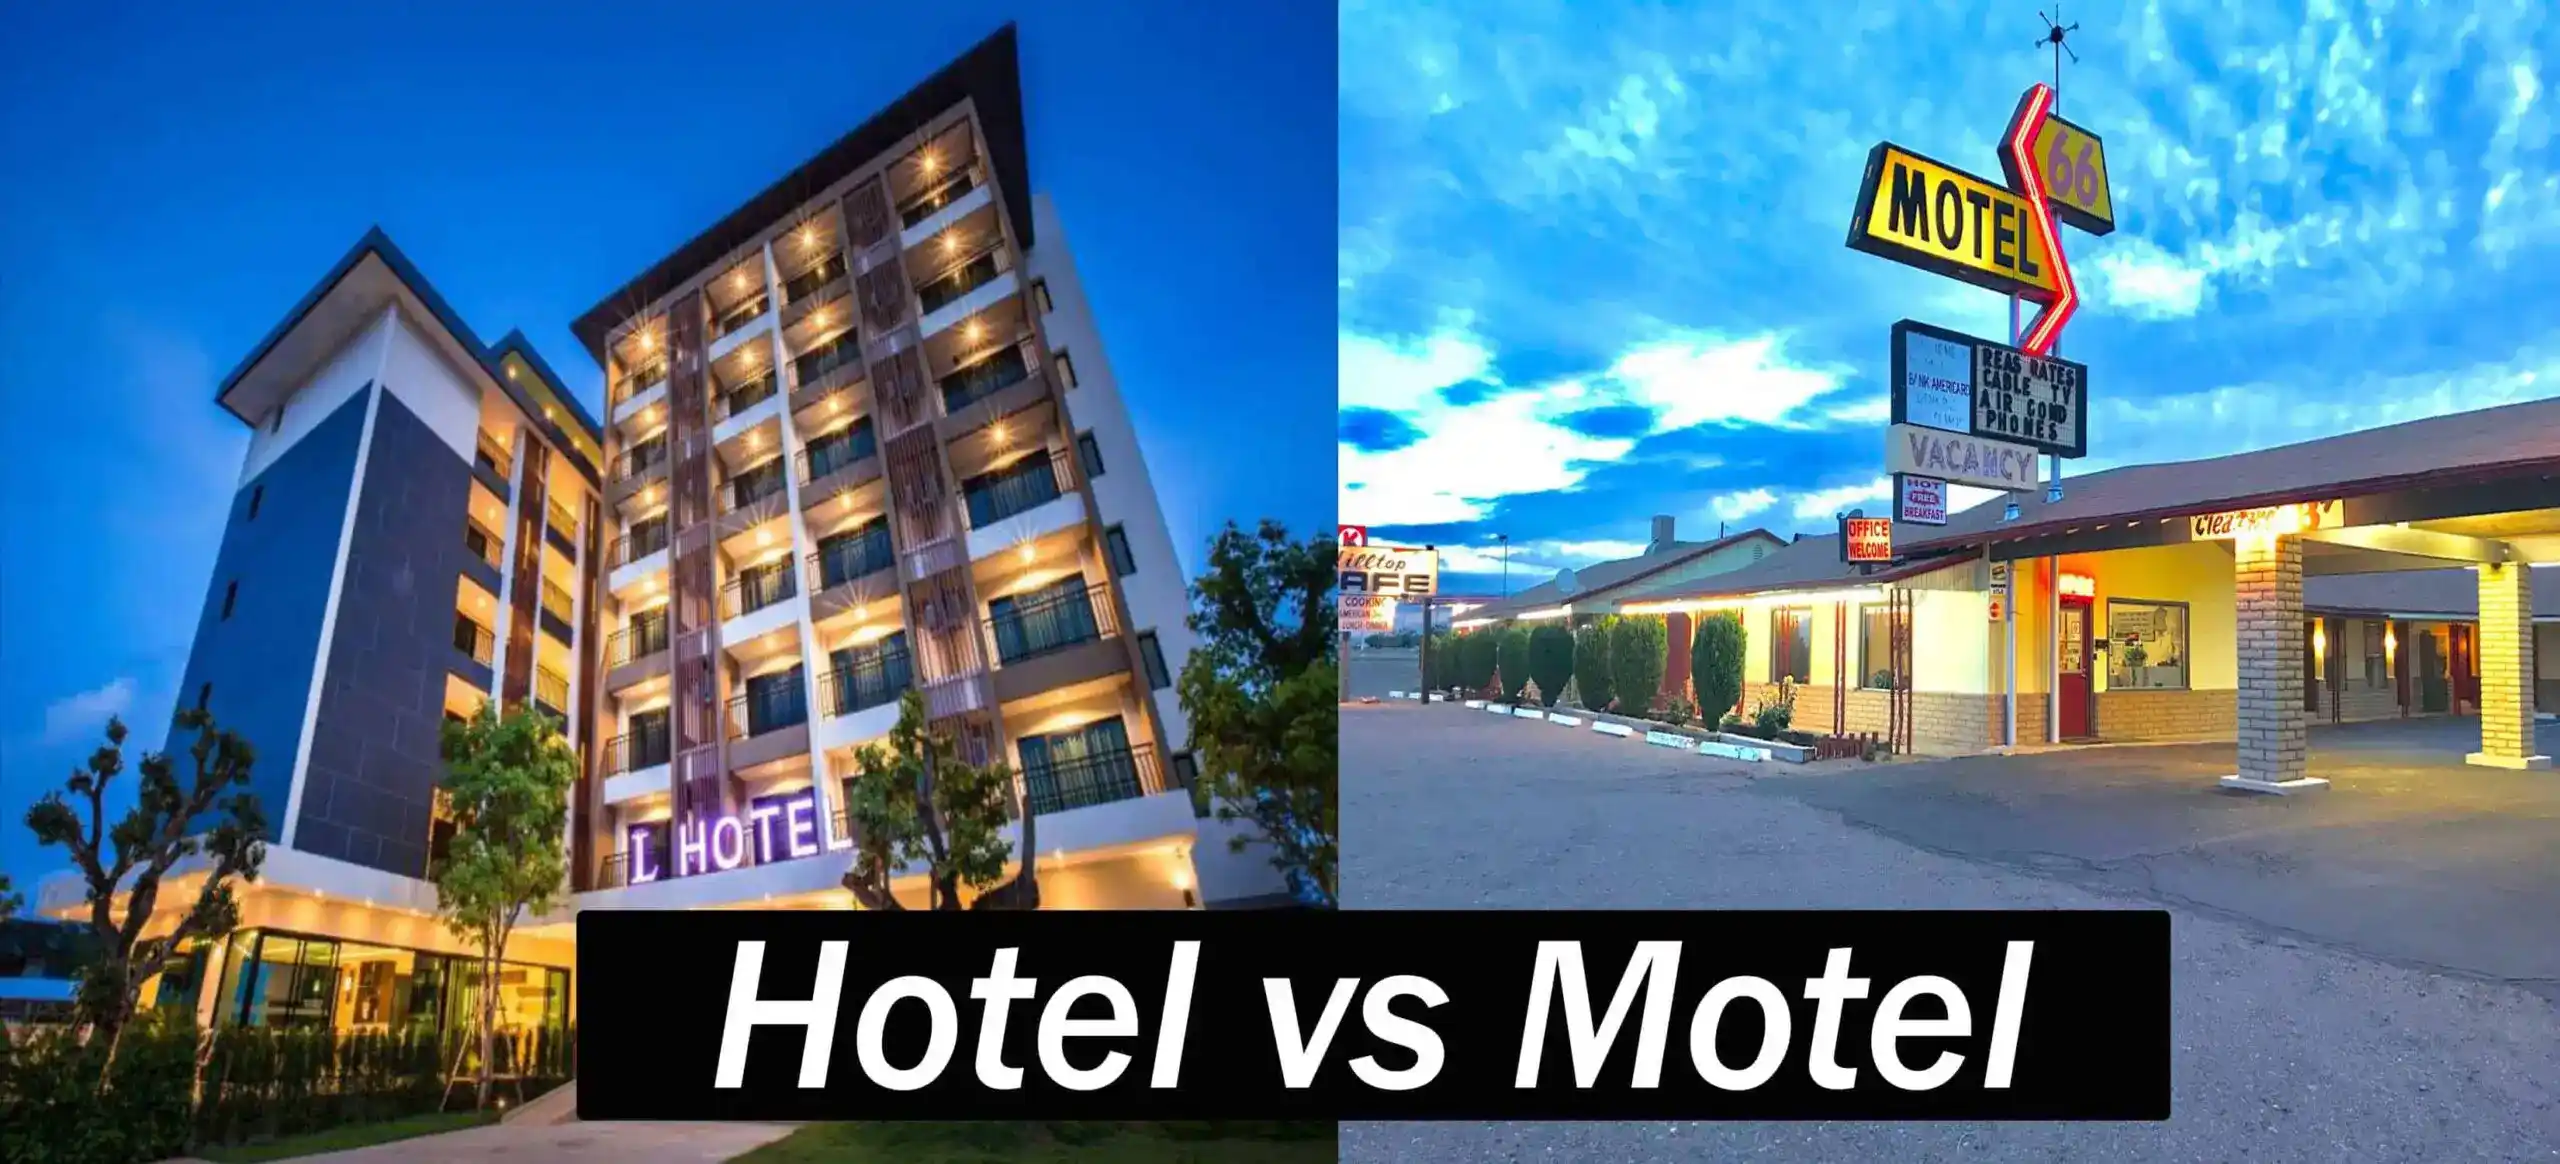 Hotels vs Motels: What's The Difference? - Travelistia